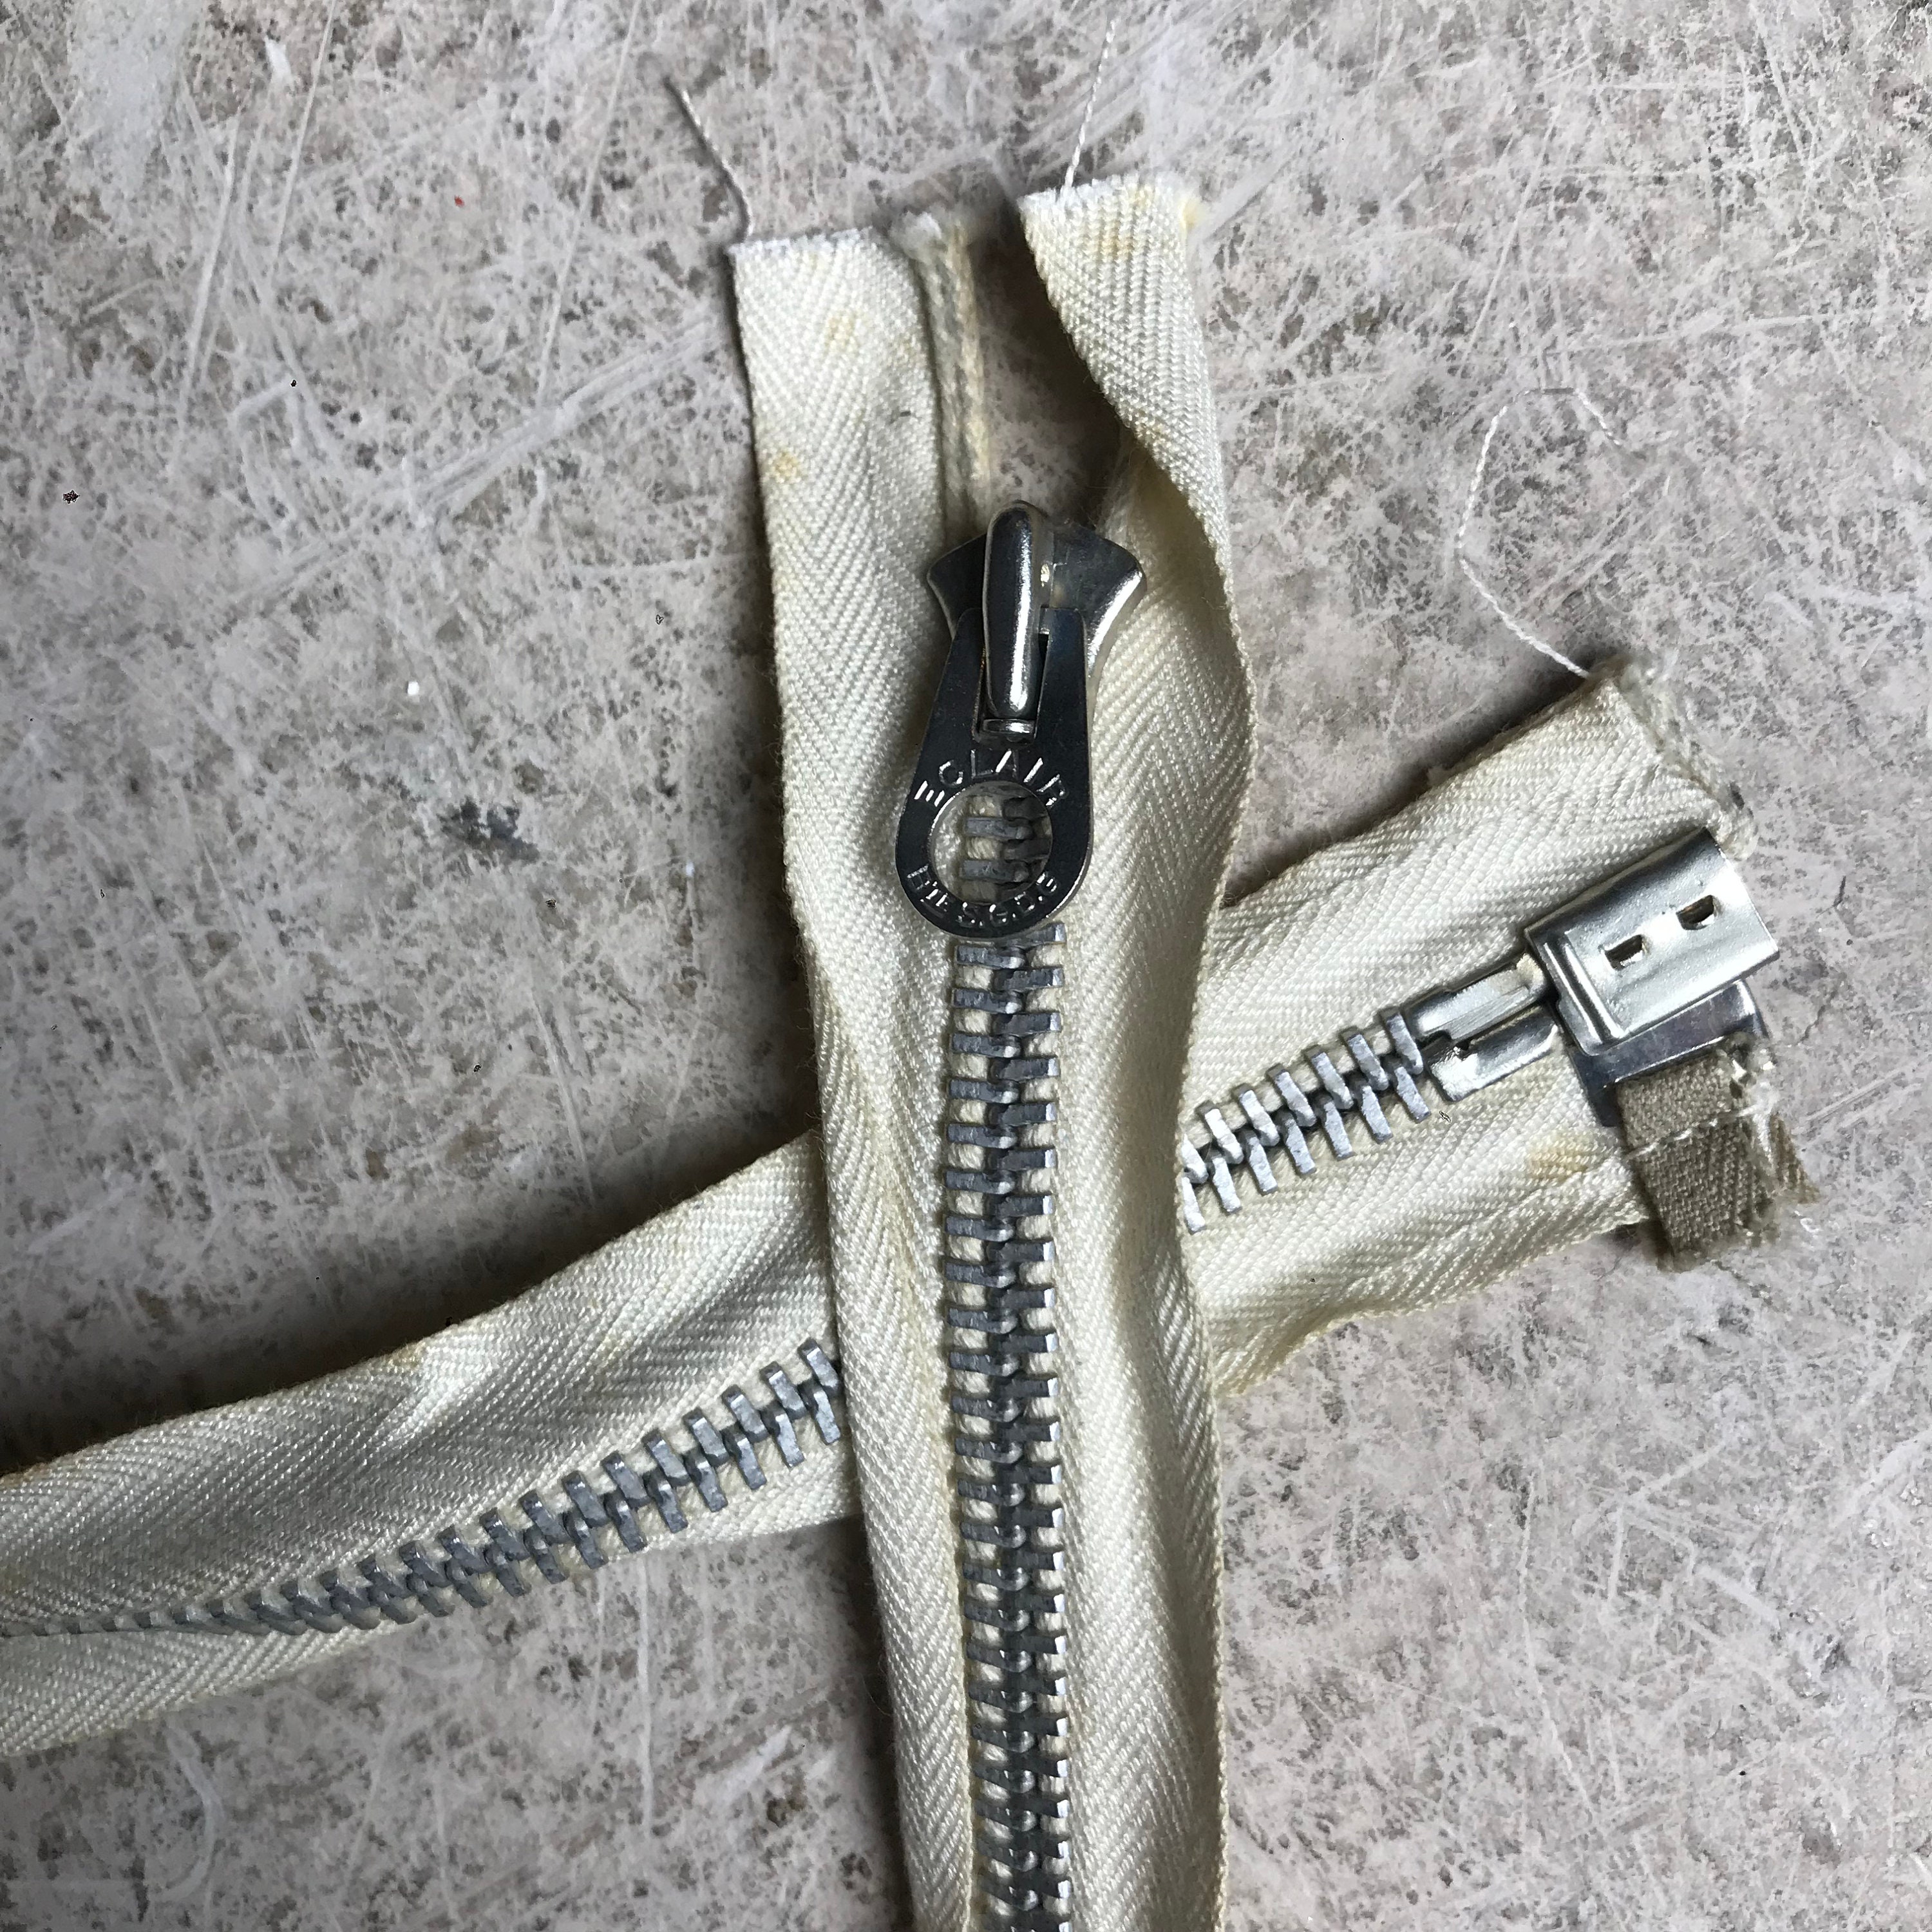 Eclair zippers were used by the French Luggage Company, correct